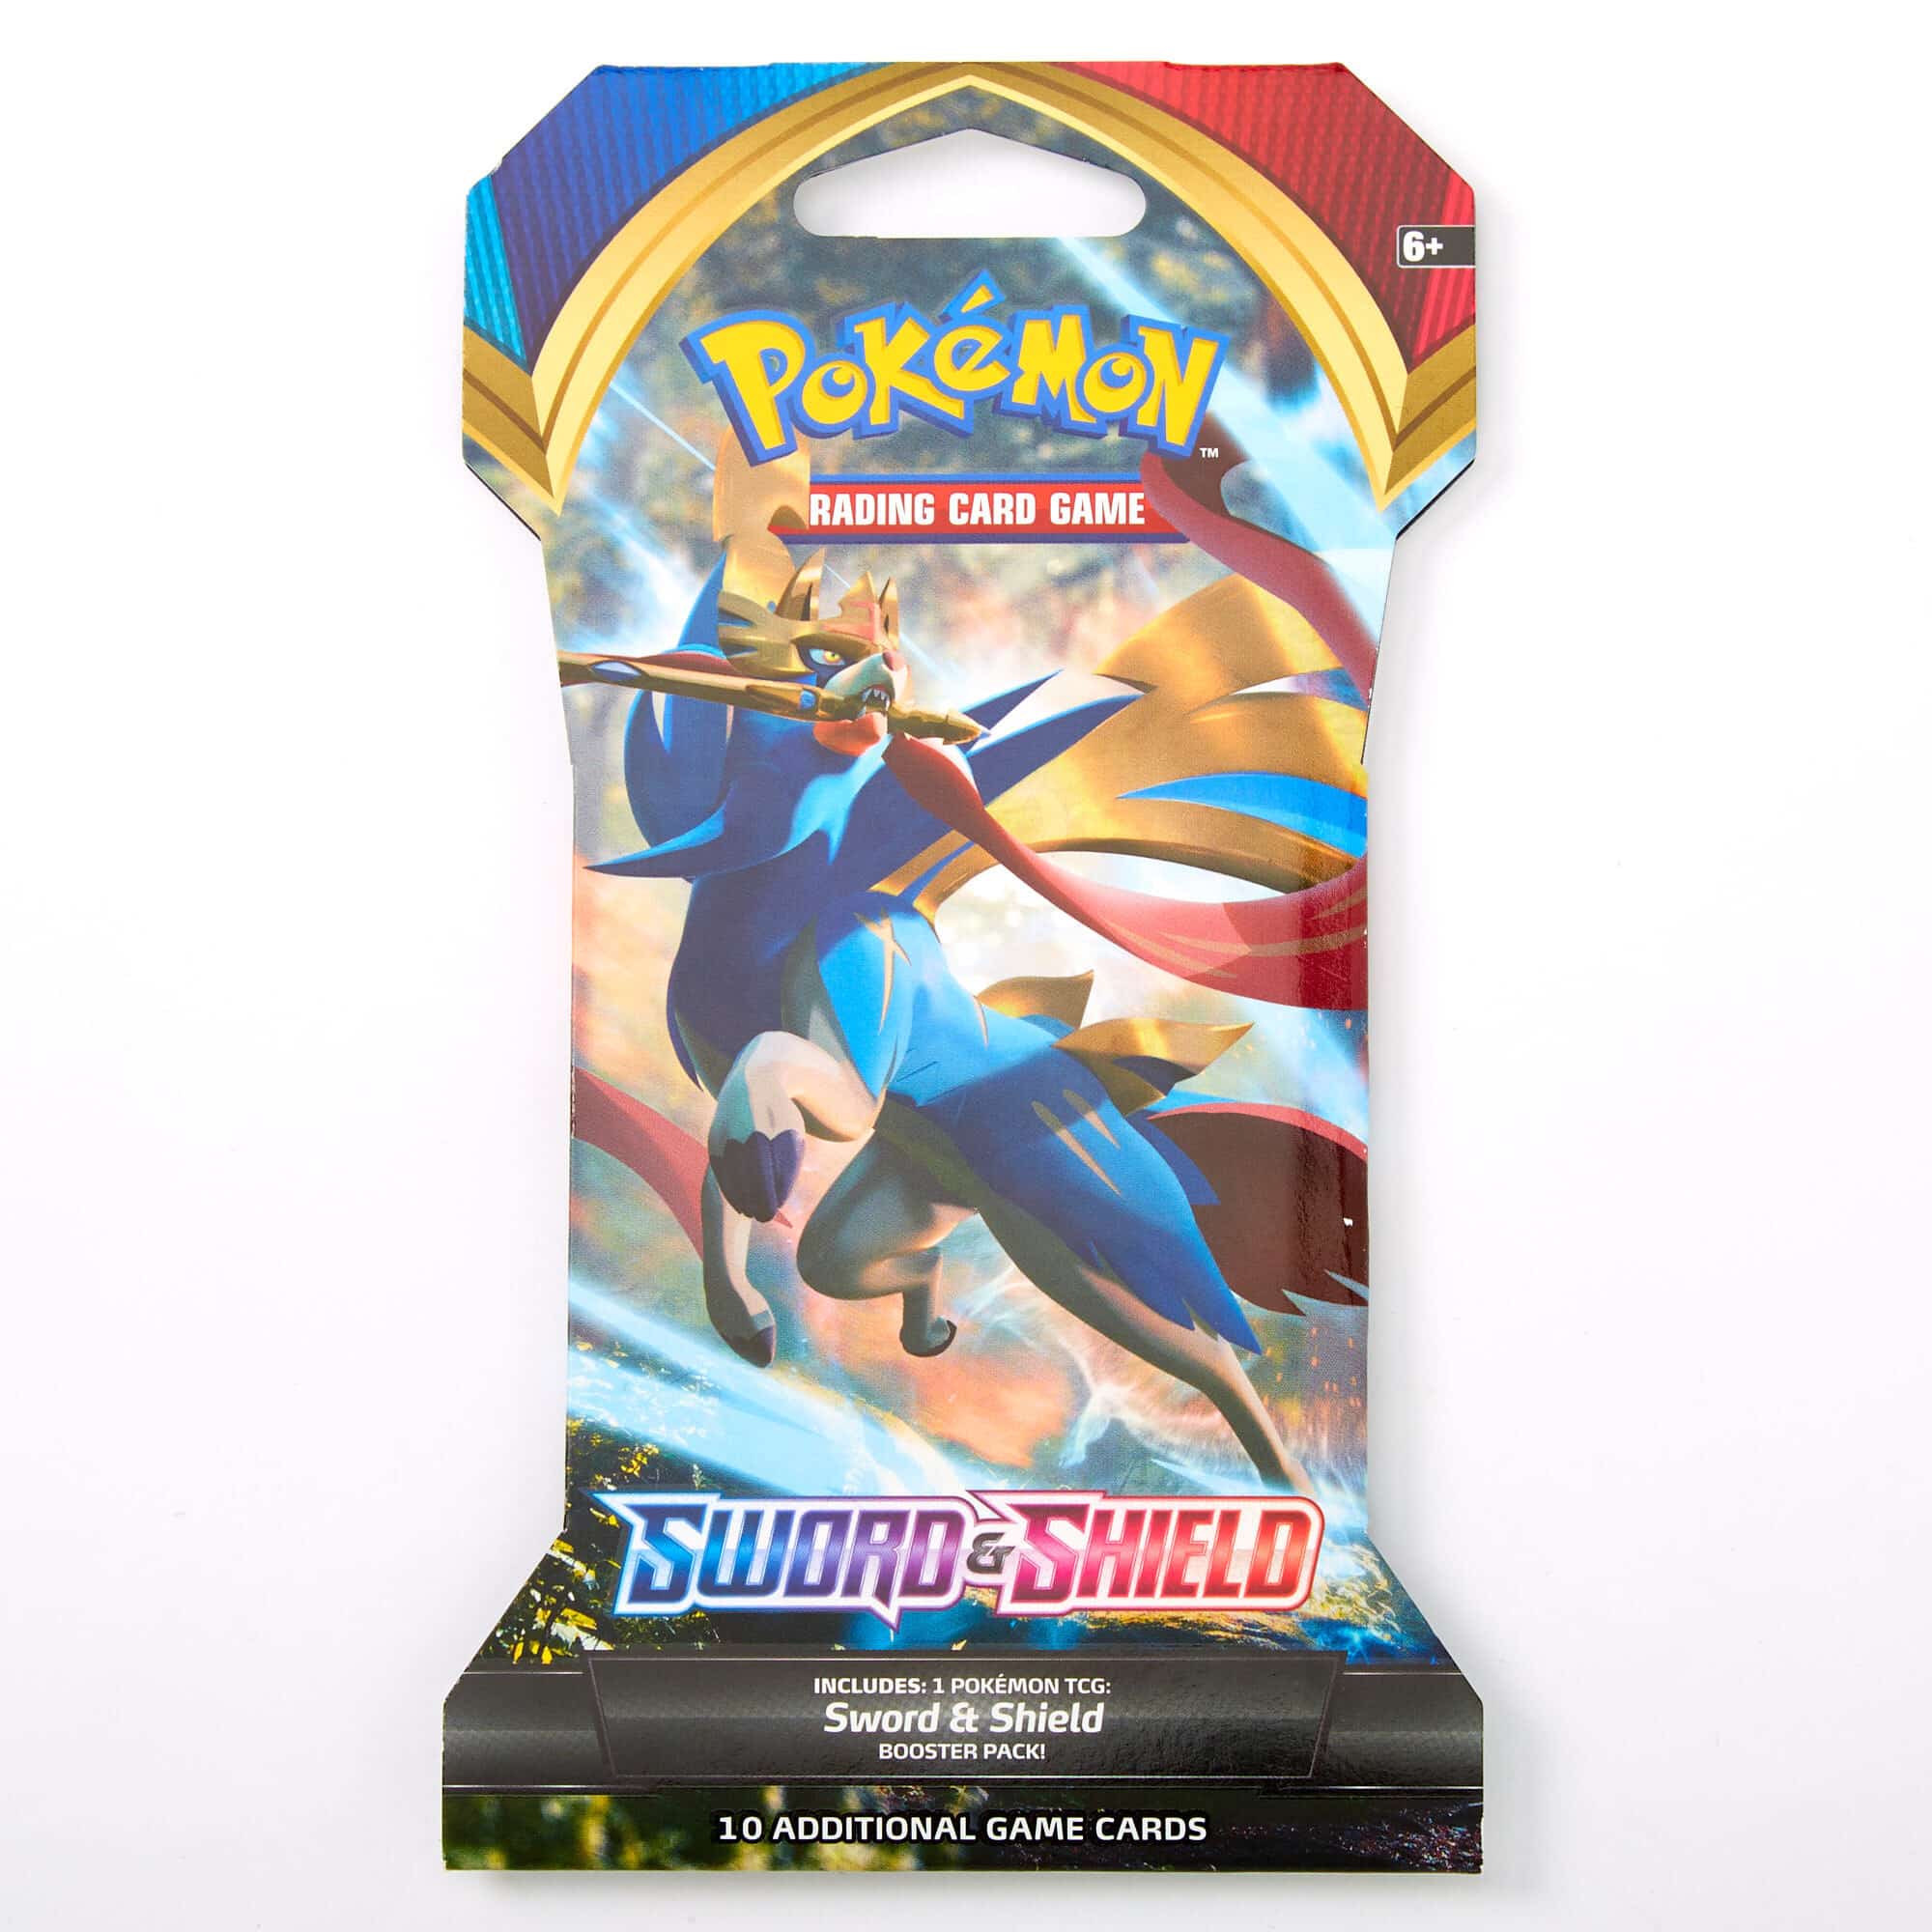 Pokémon Sword &  Shield Trading Cards Booster Pack